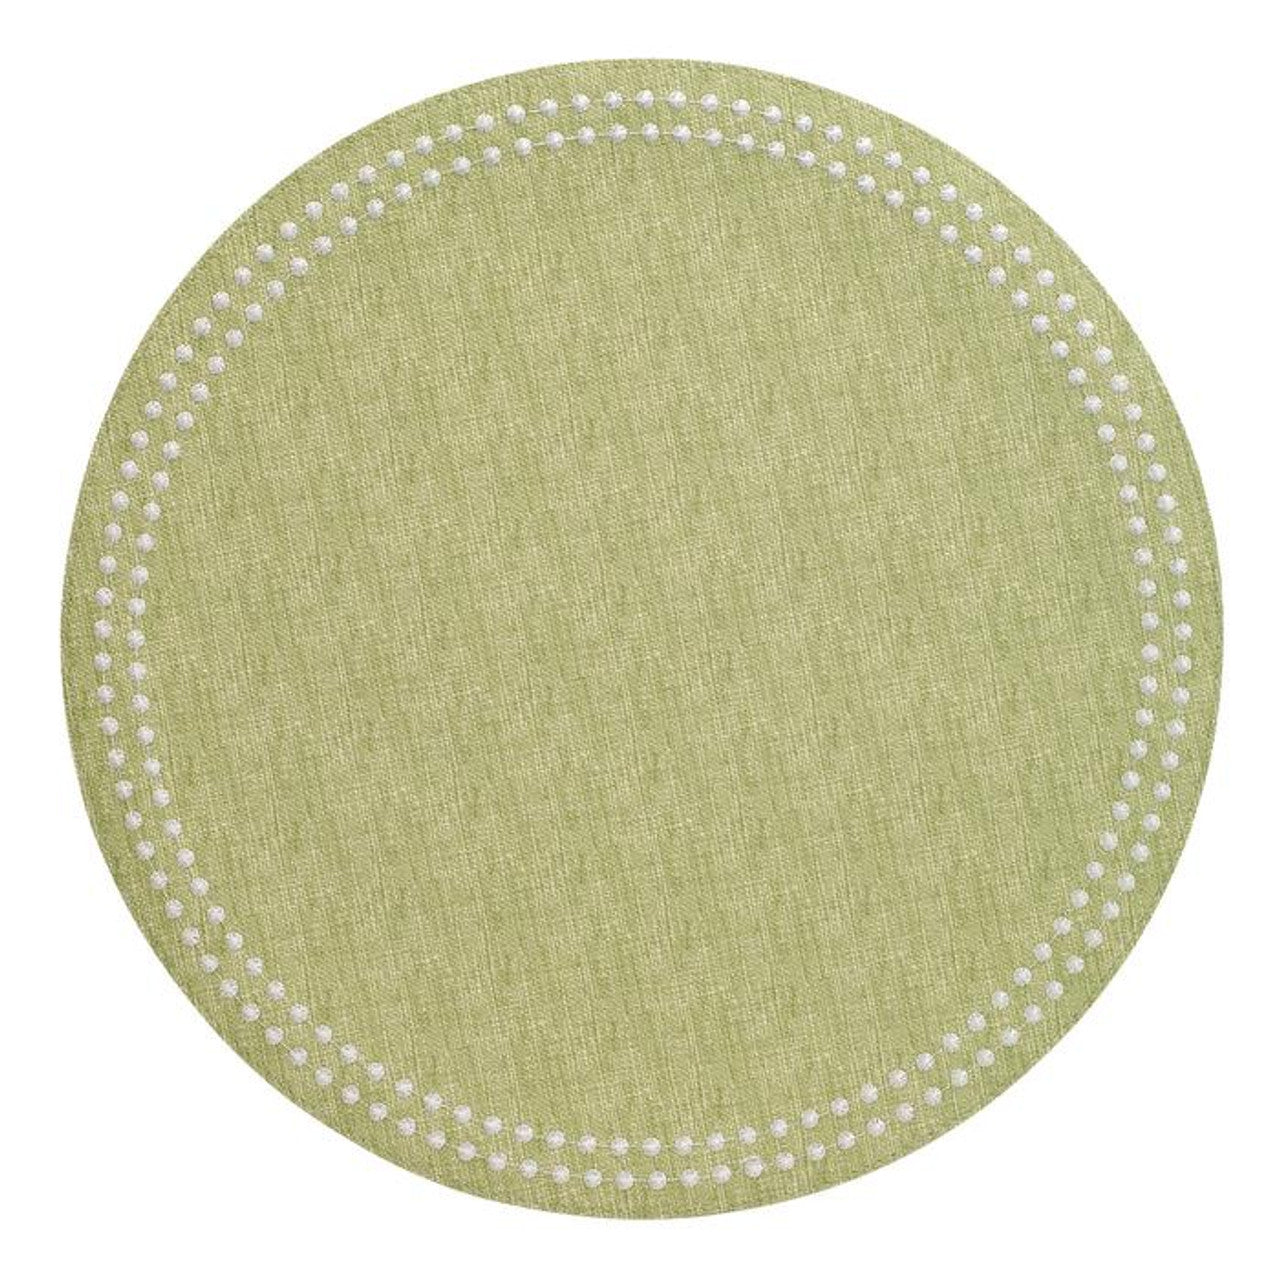 Pearls Place Mats